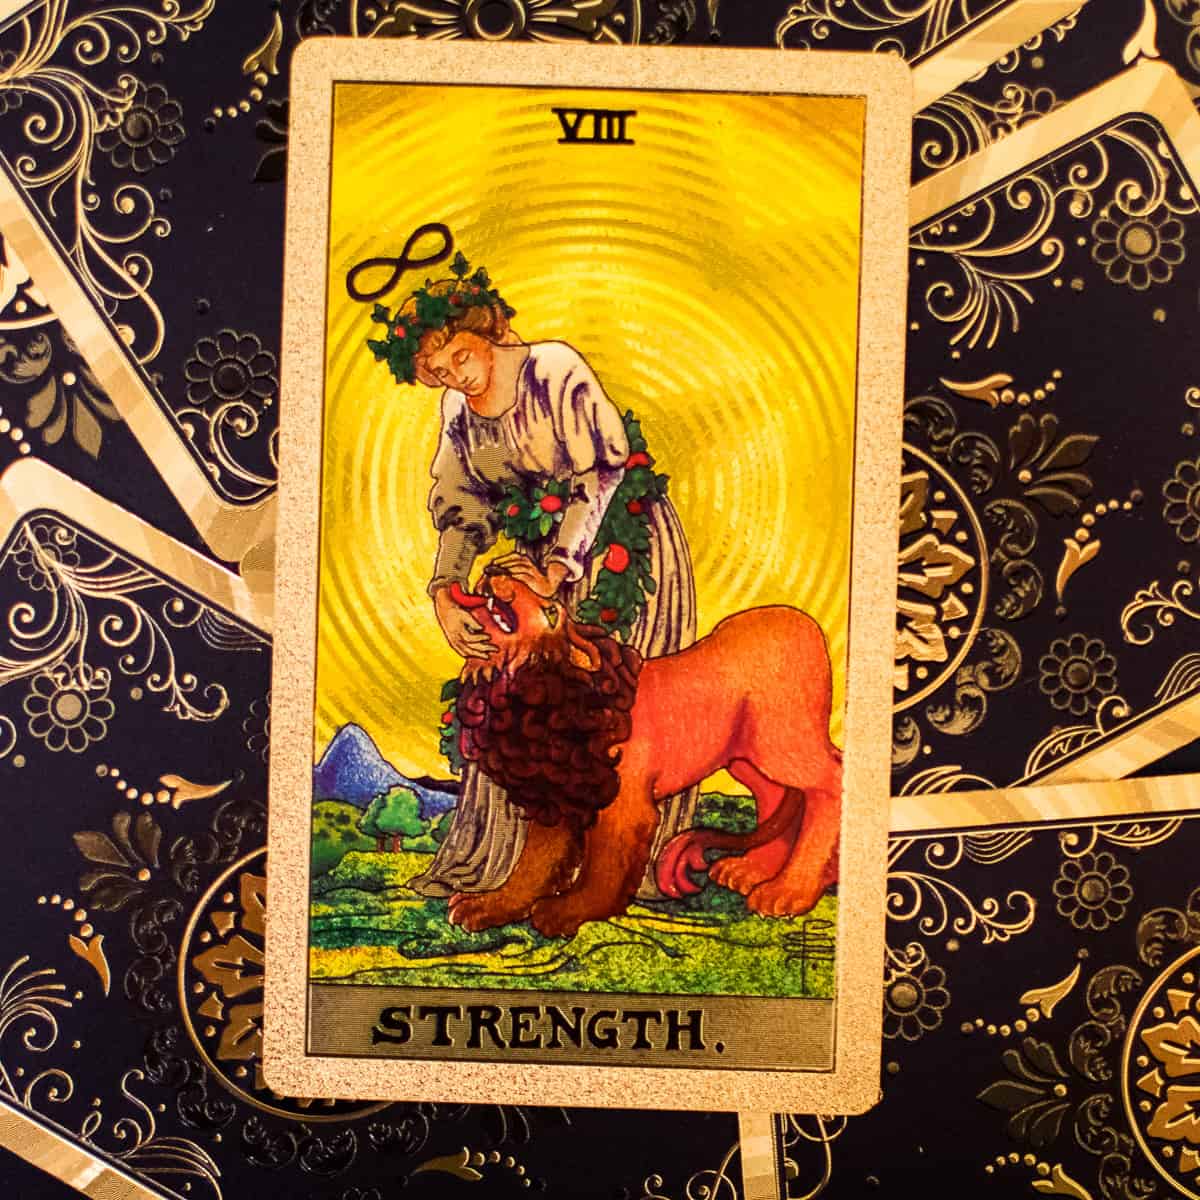 Woman with infinity sign petting a lion as depicted on the Strength tarot card.